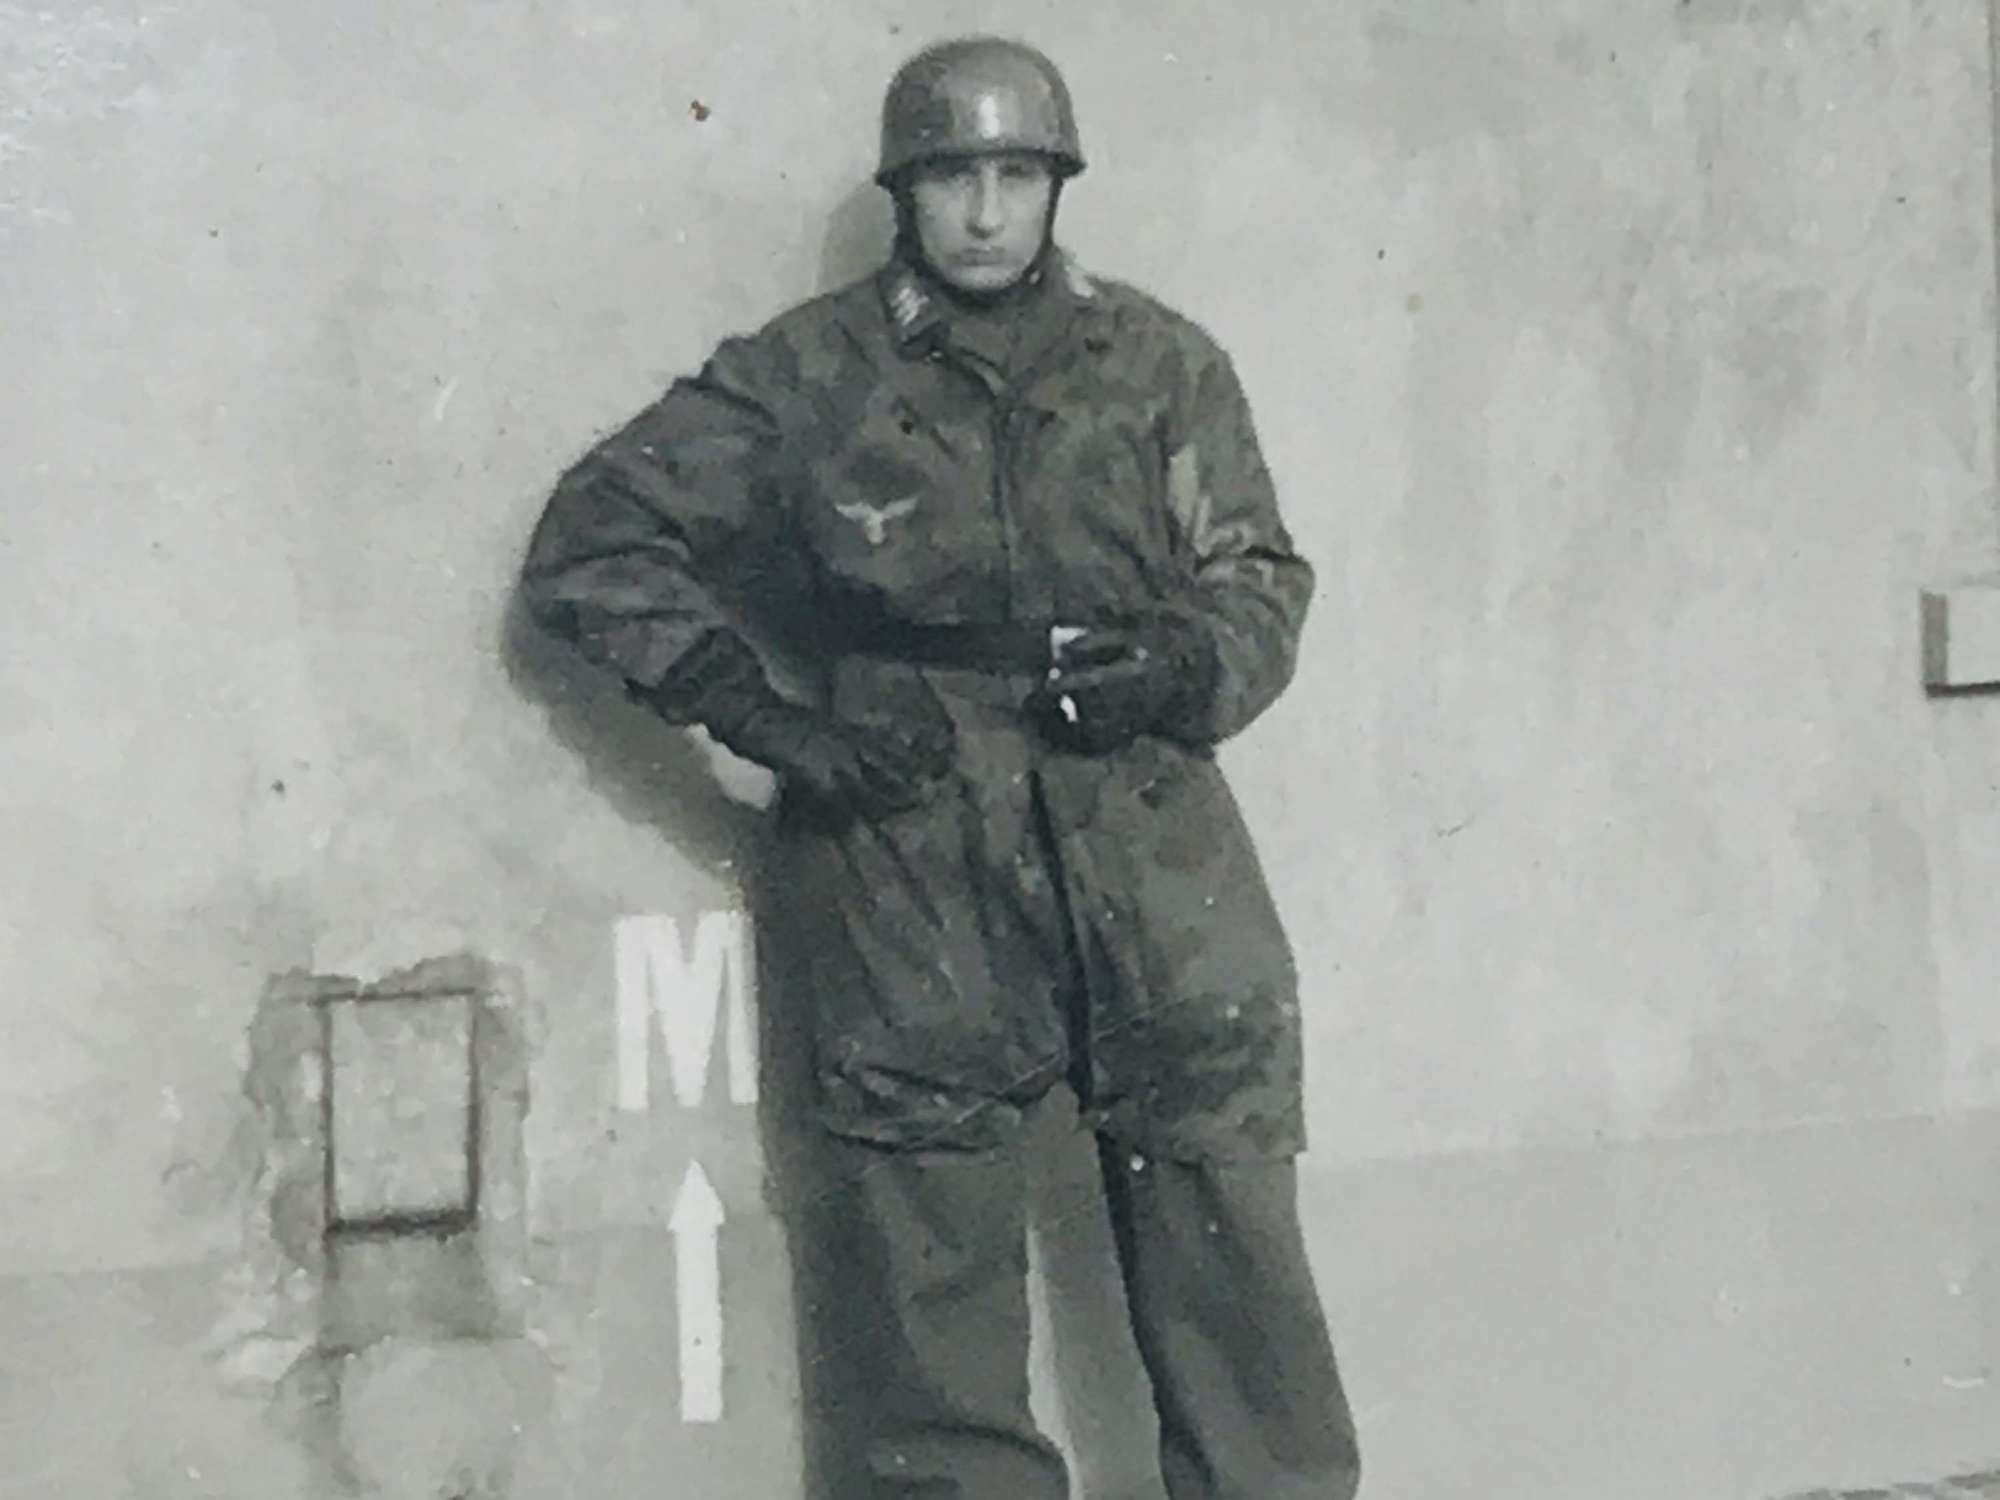 Photo of a Fallschirmjager with helmet and smock